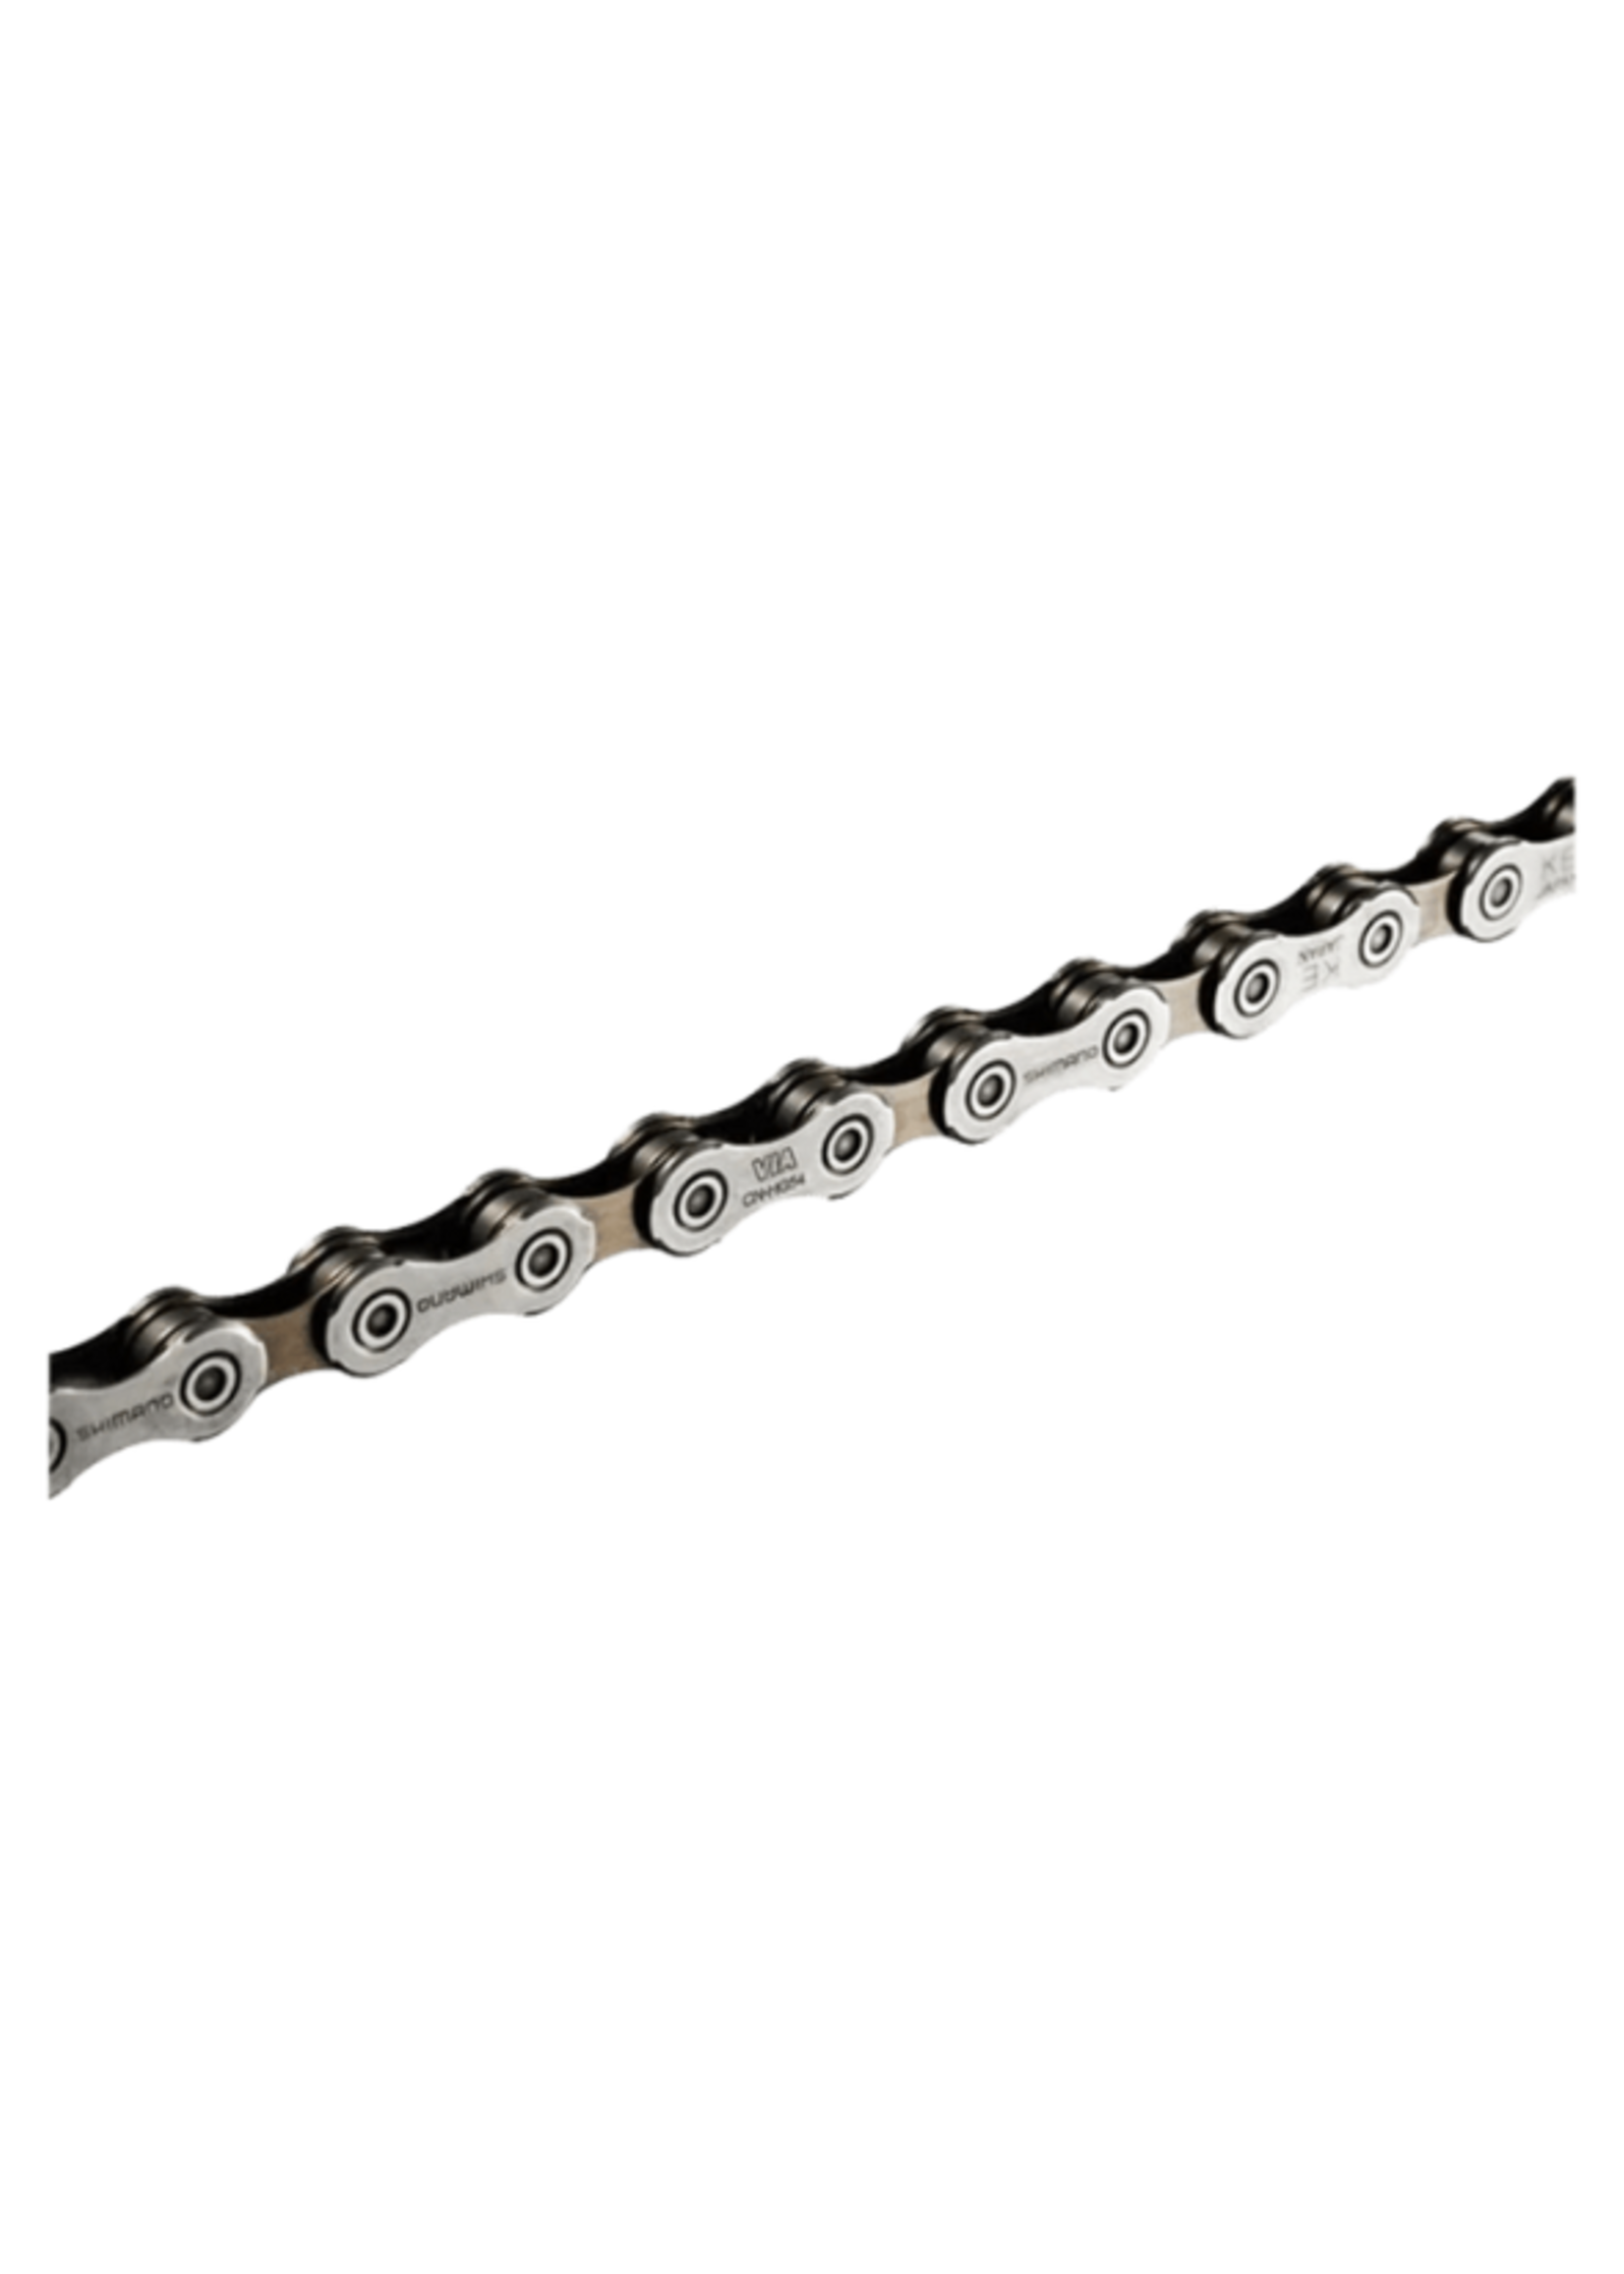 Shimano Shimano Deore CN-HG54 Chain - 10-Speed, 116 Links, Silver